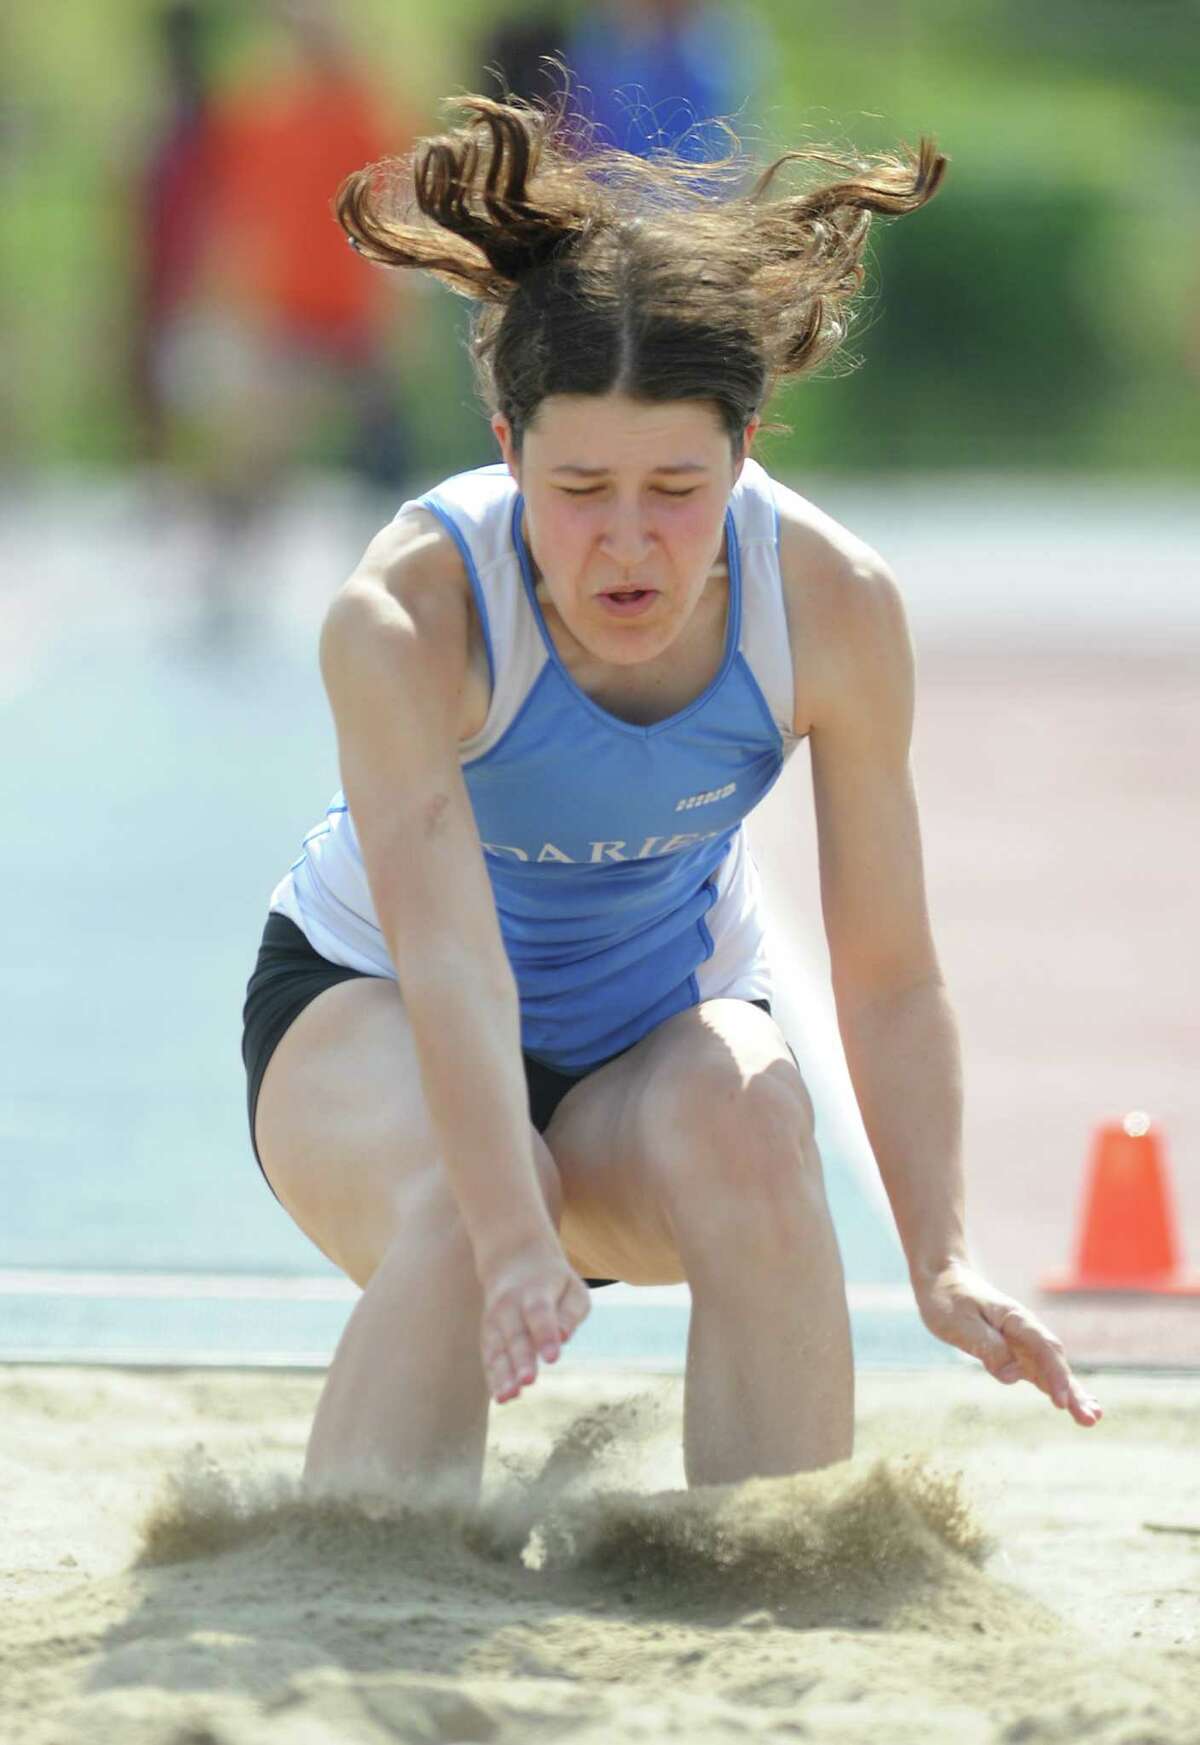 Danbury boys, Darien girls currently in first place at FCIAC track and